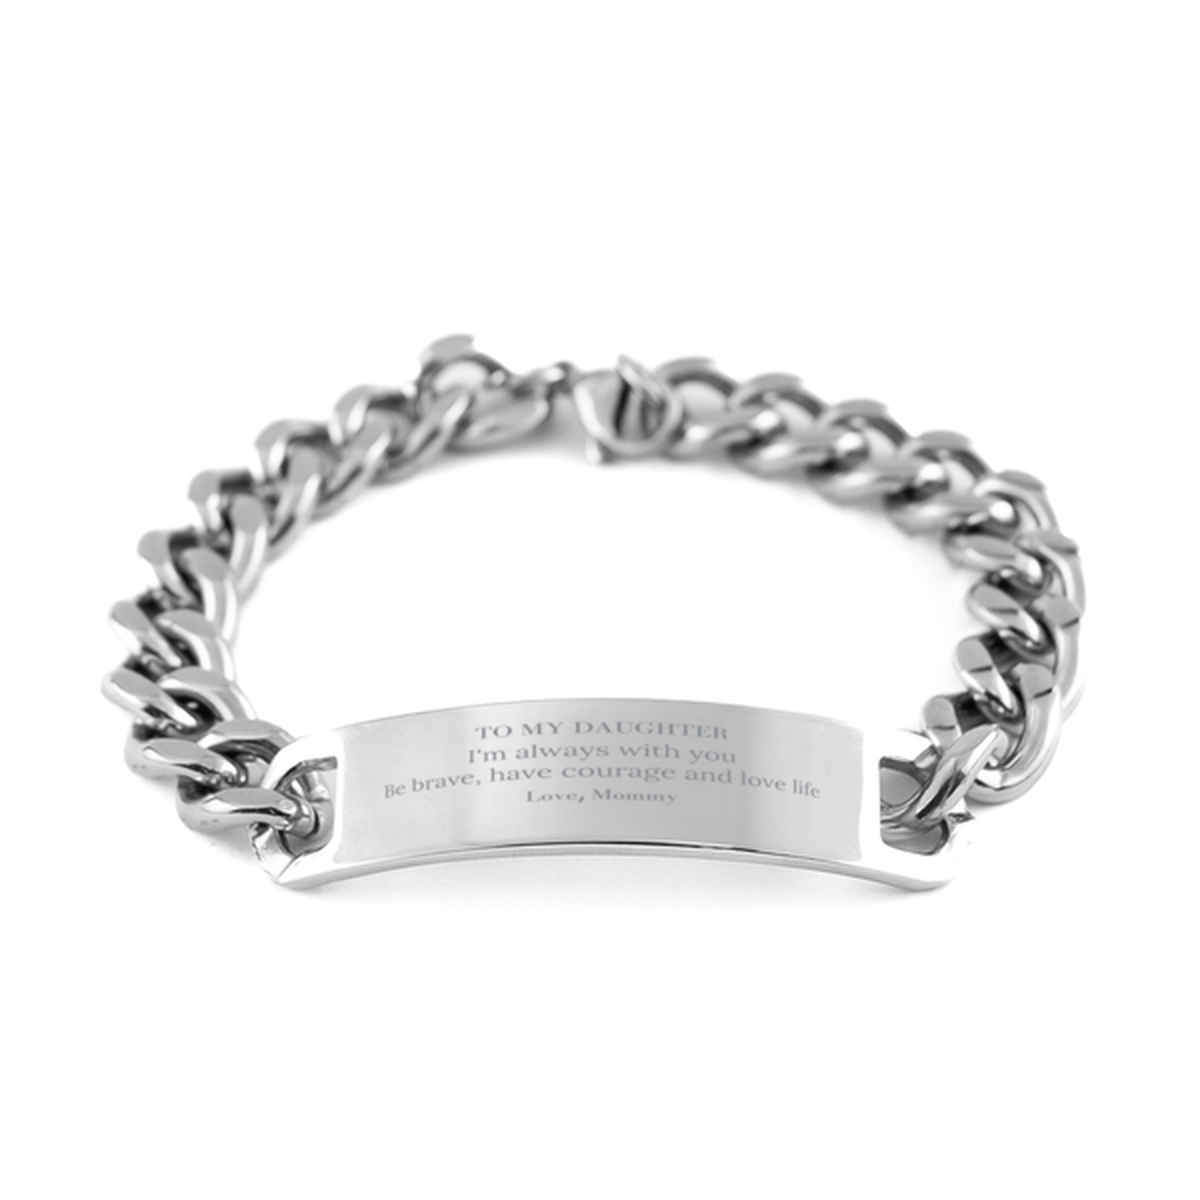 To My Daughter Gifts from Mommy, Unique Cuban Chain Stainless Steel Bracelet Inspirational Christmas Birthday Graduation Gifts for Daughter I'm always with you. Be brave, have courage and love life. Love, Mommy